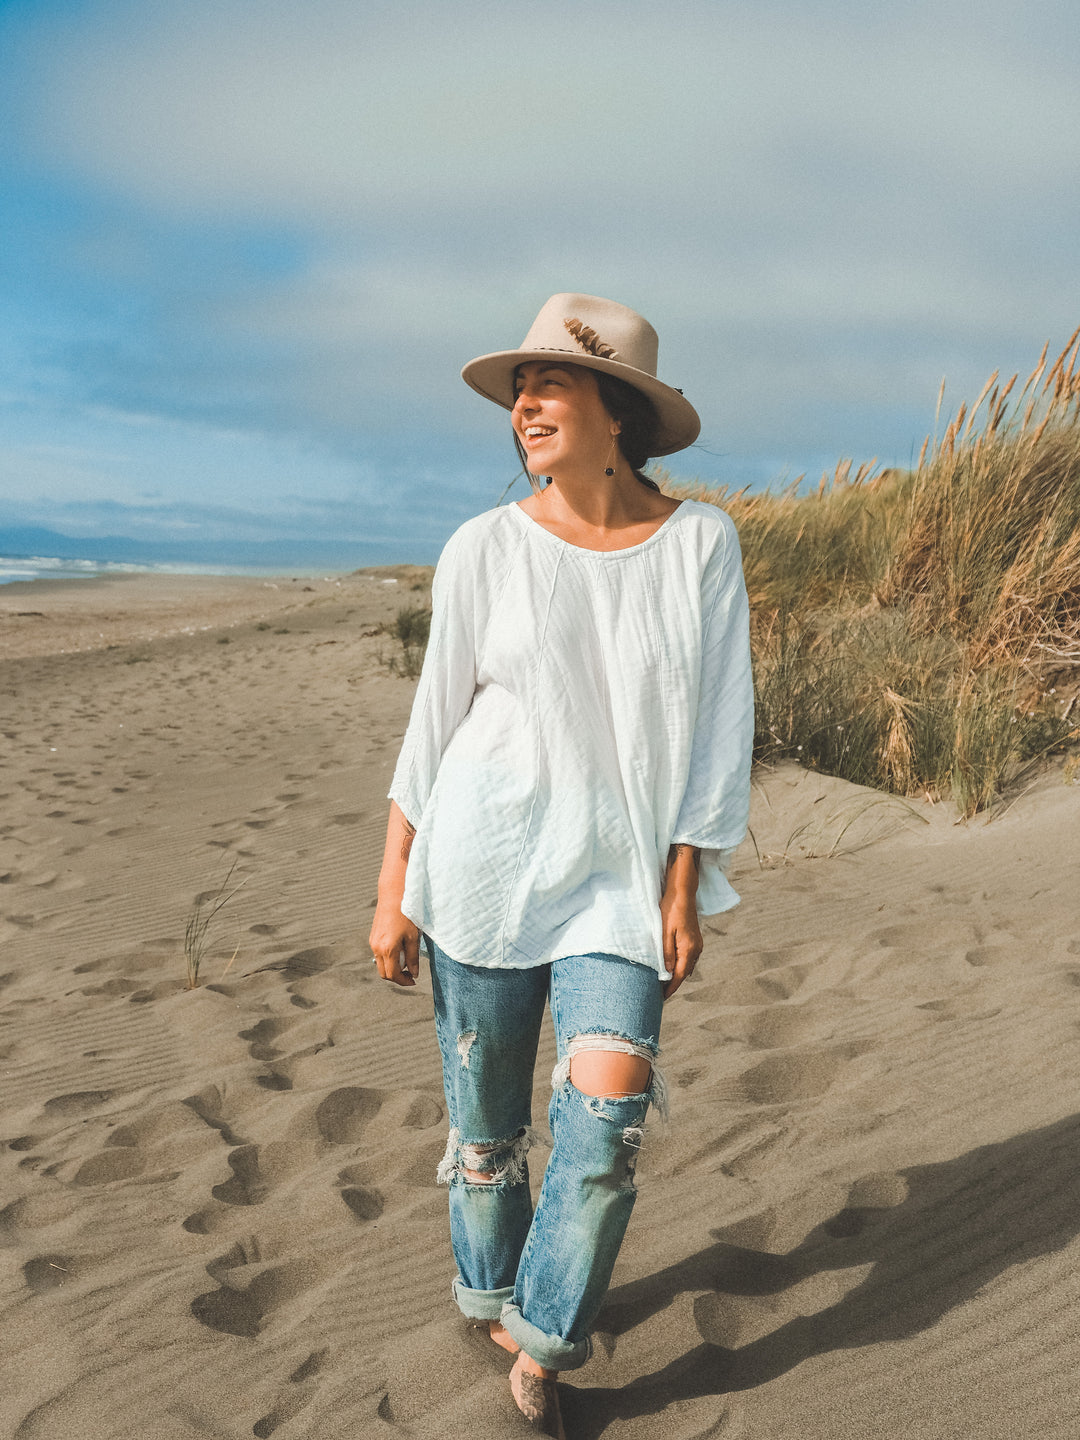 Woman walks barefoot on sand near ocean wearing hat, un-dyed shirt with three quarter length sleeves and jeans.